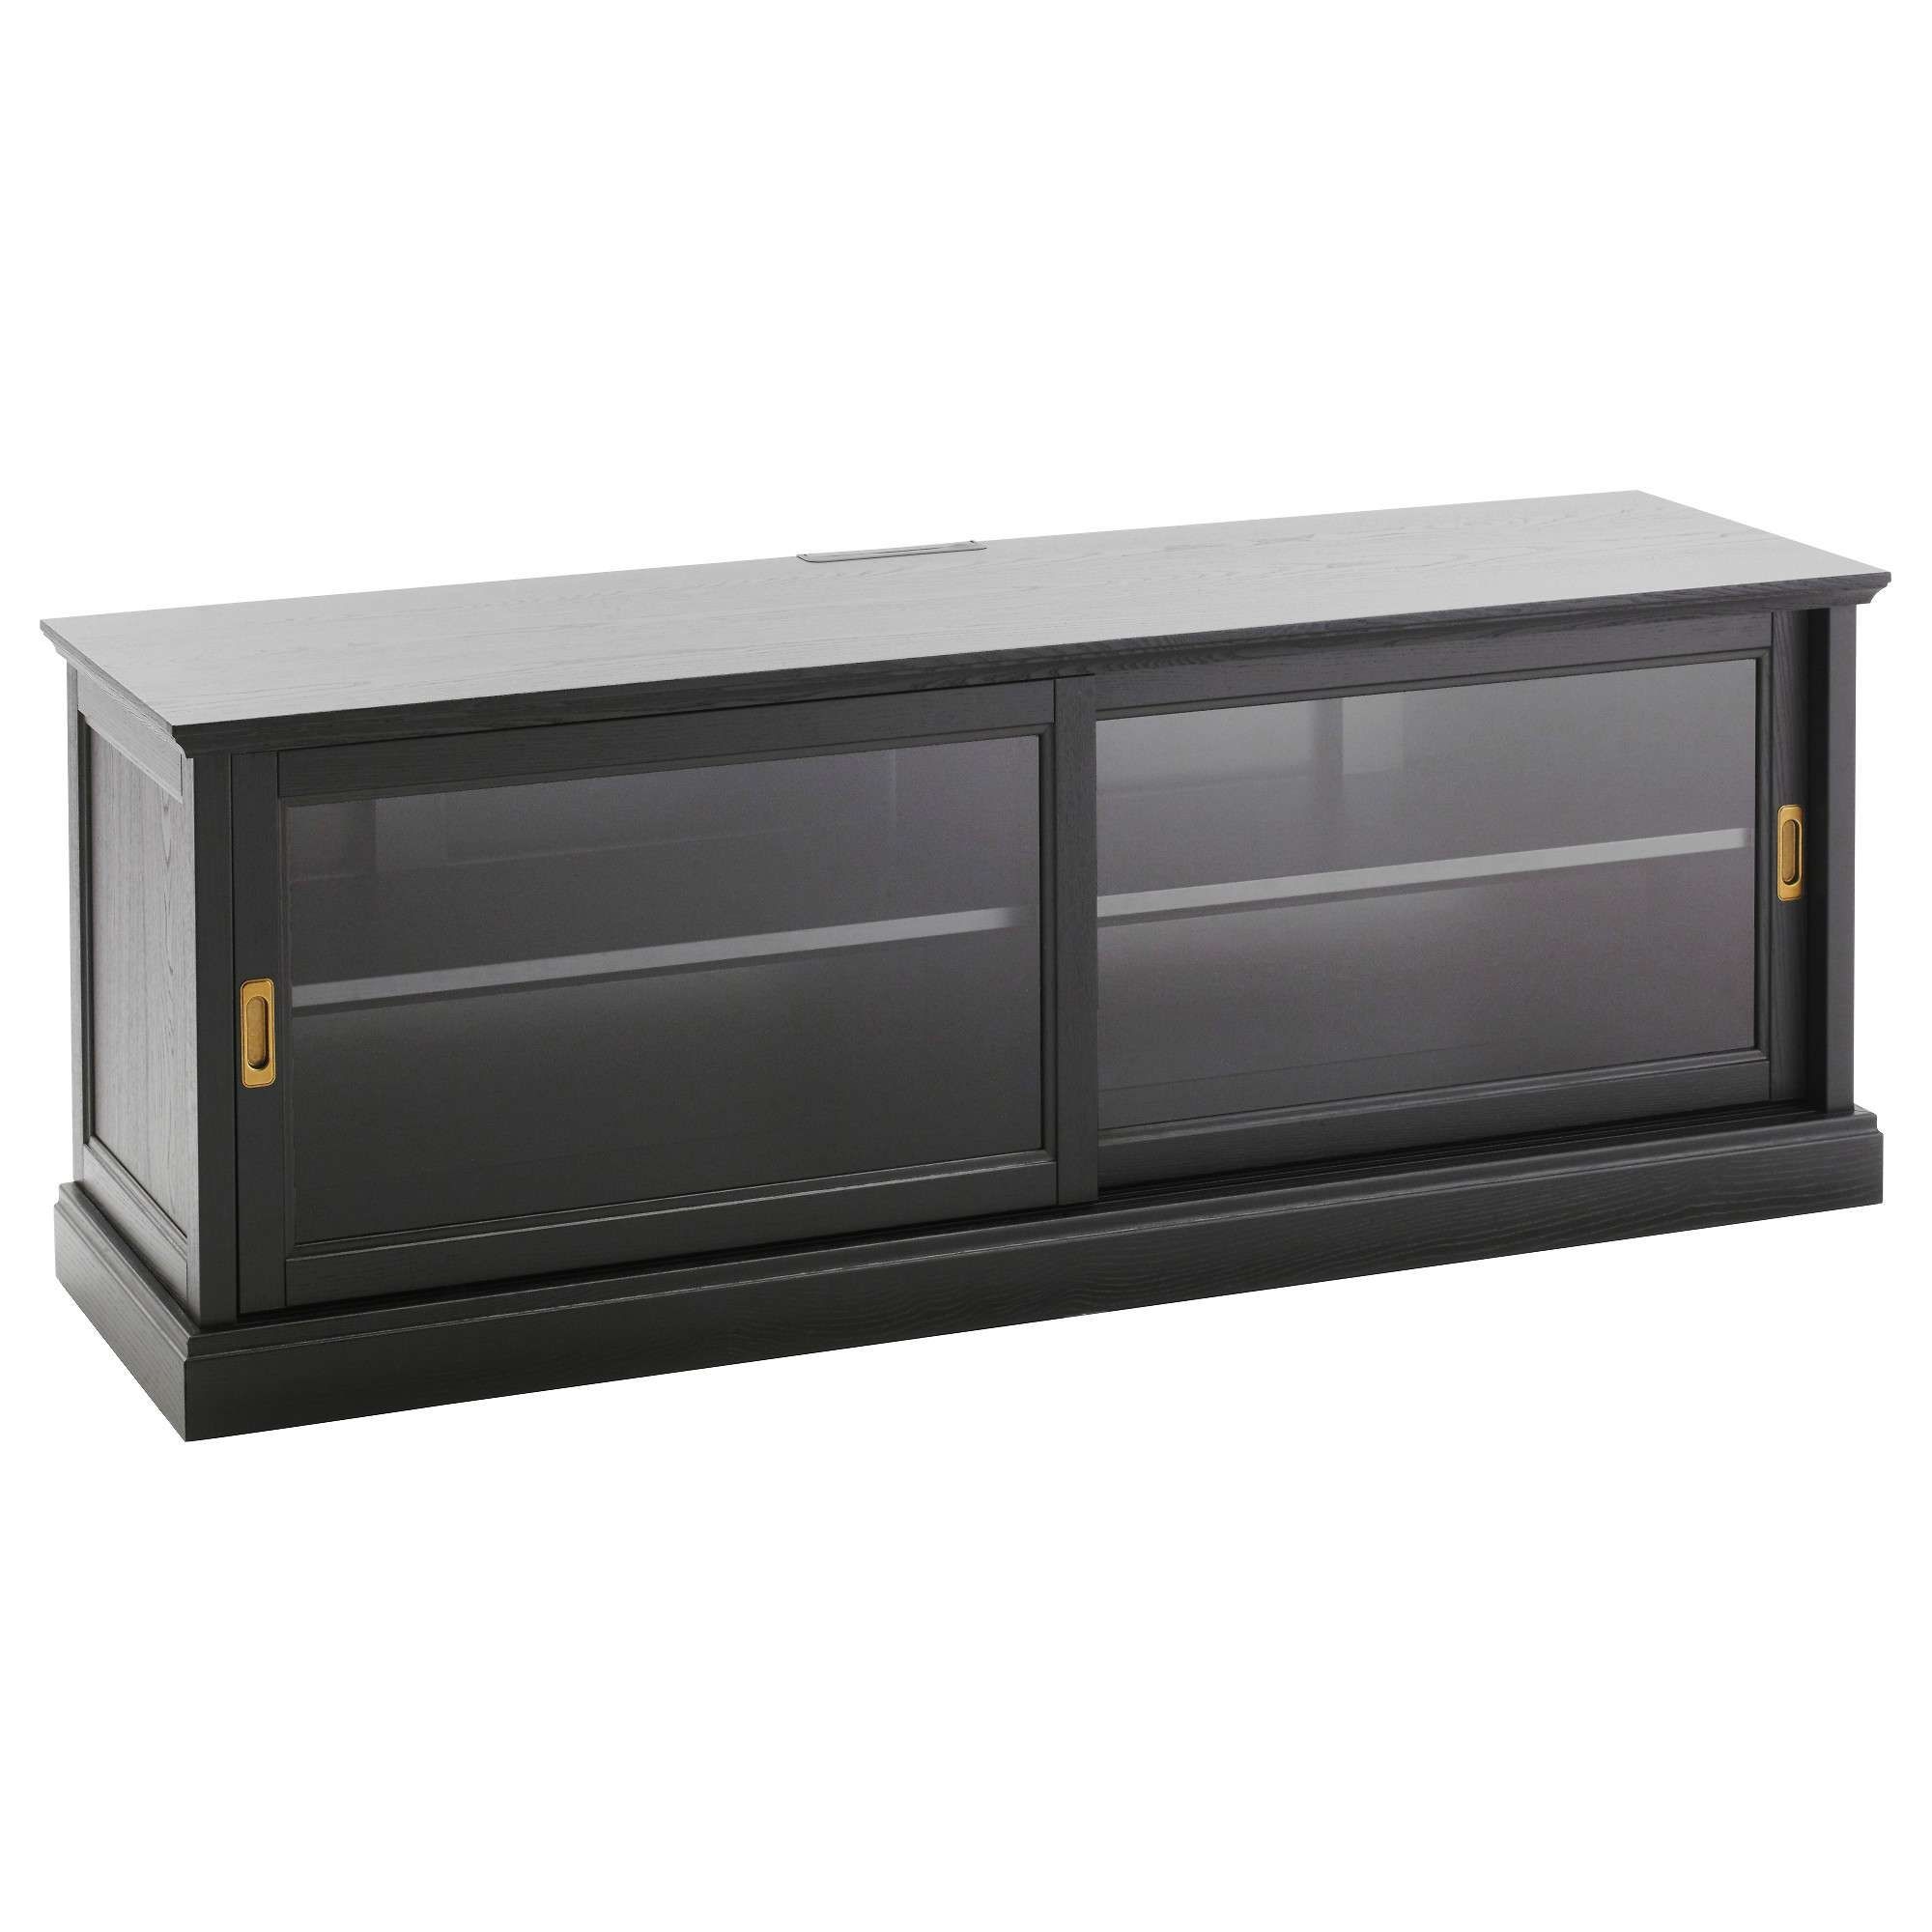 Tv Stands & Entertainment Centers – Ikea For Black Corner Tv Cabinets With Glass Doors (View 17 of 20)